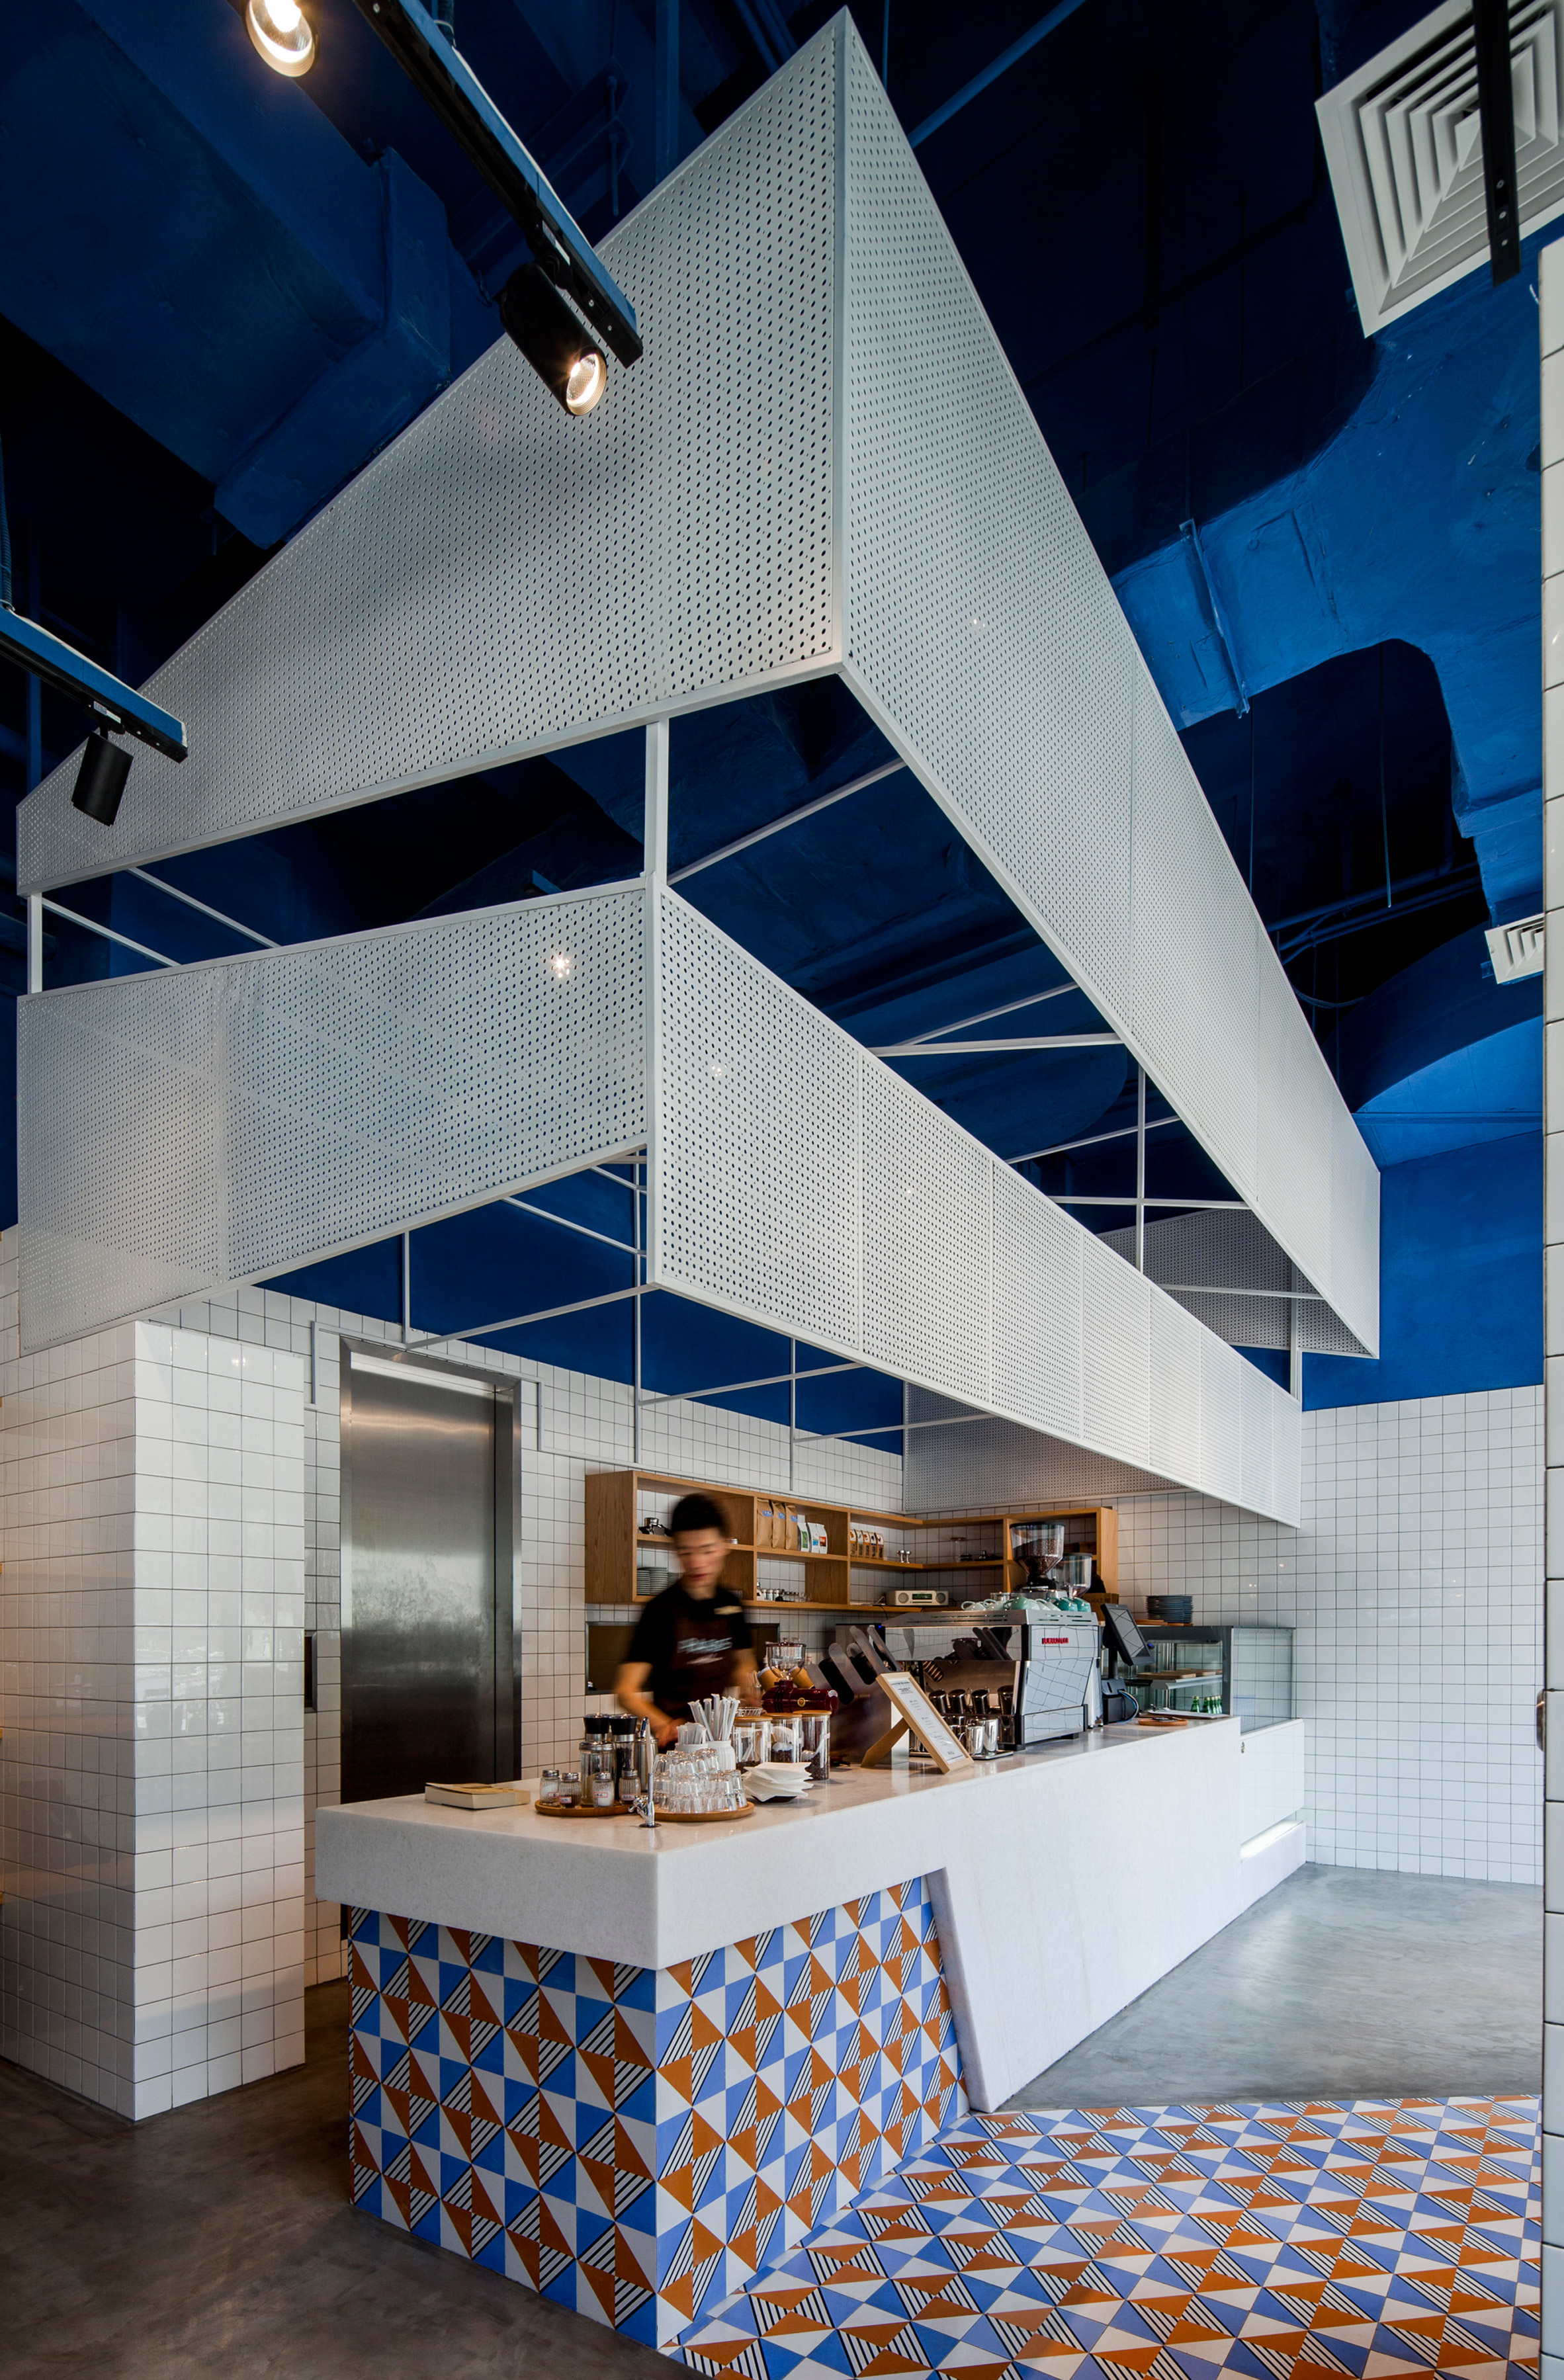 Paras Cafe by Swimming Pool Studio